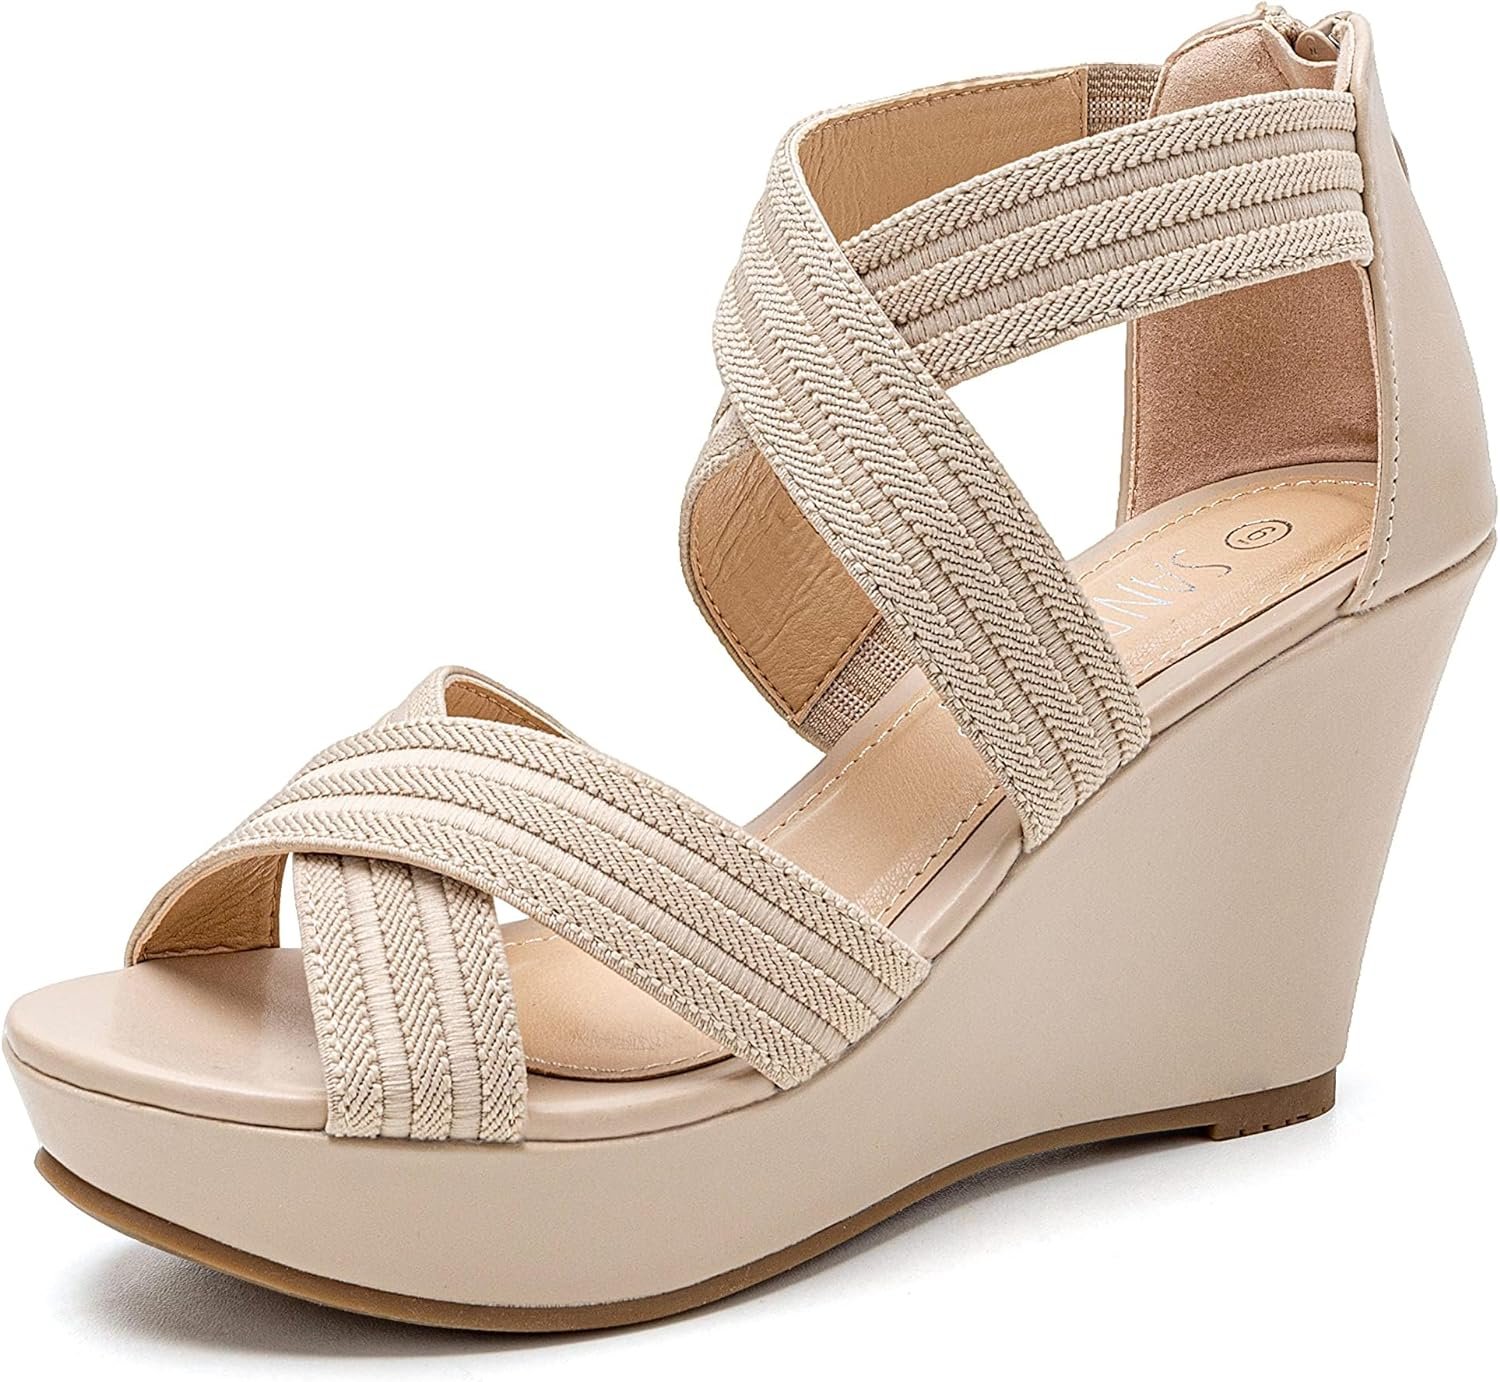 SANDALUP Wedge Sandals for Women Dressy Comfortable Ankle Strap Open Toe Wedding Shoes